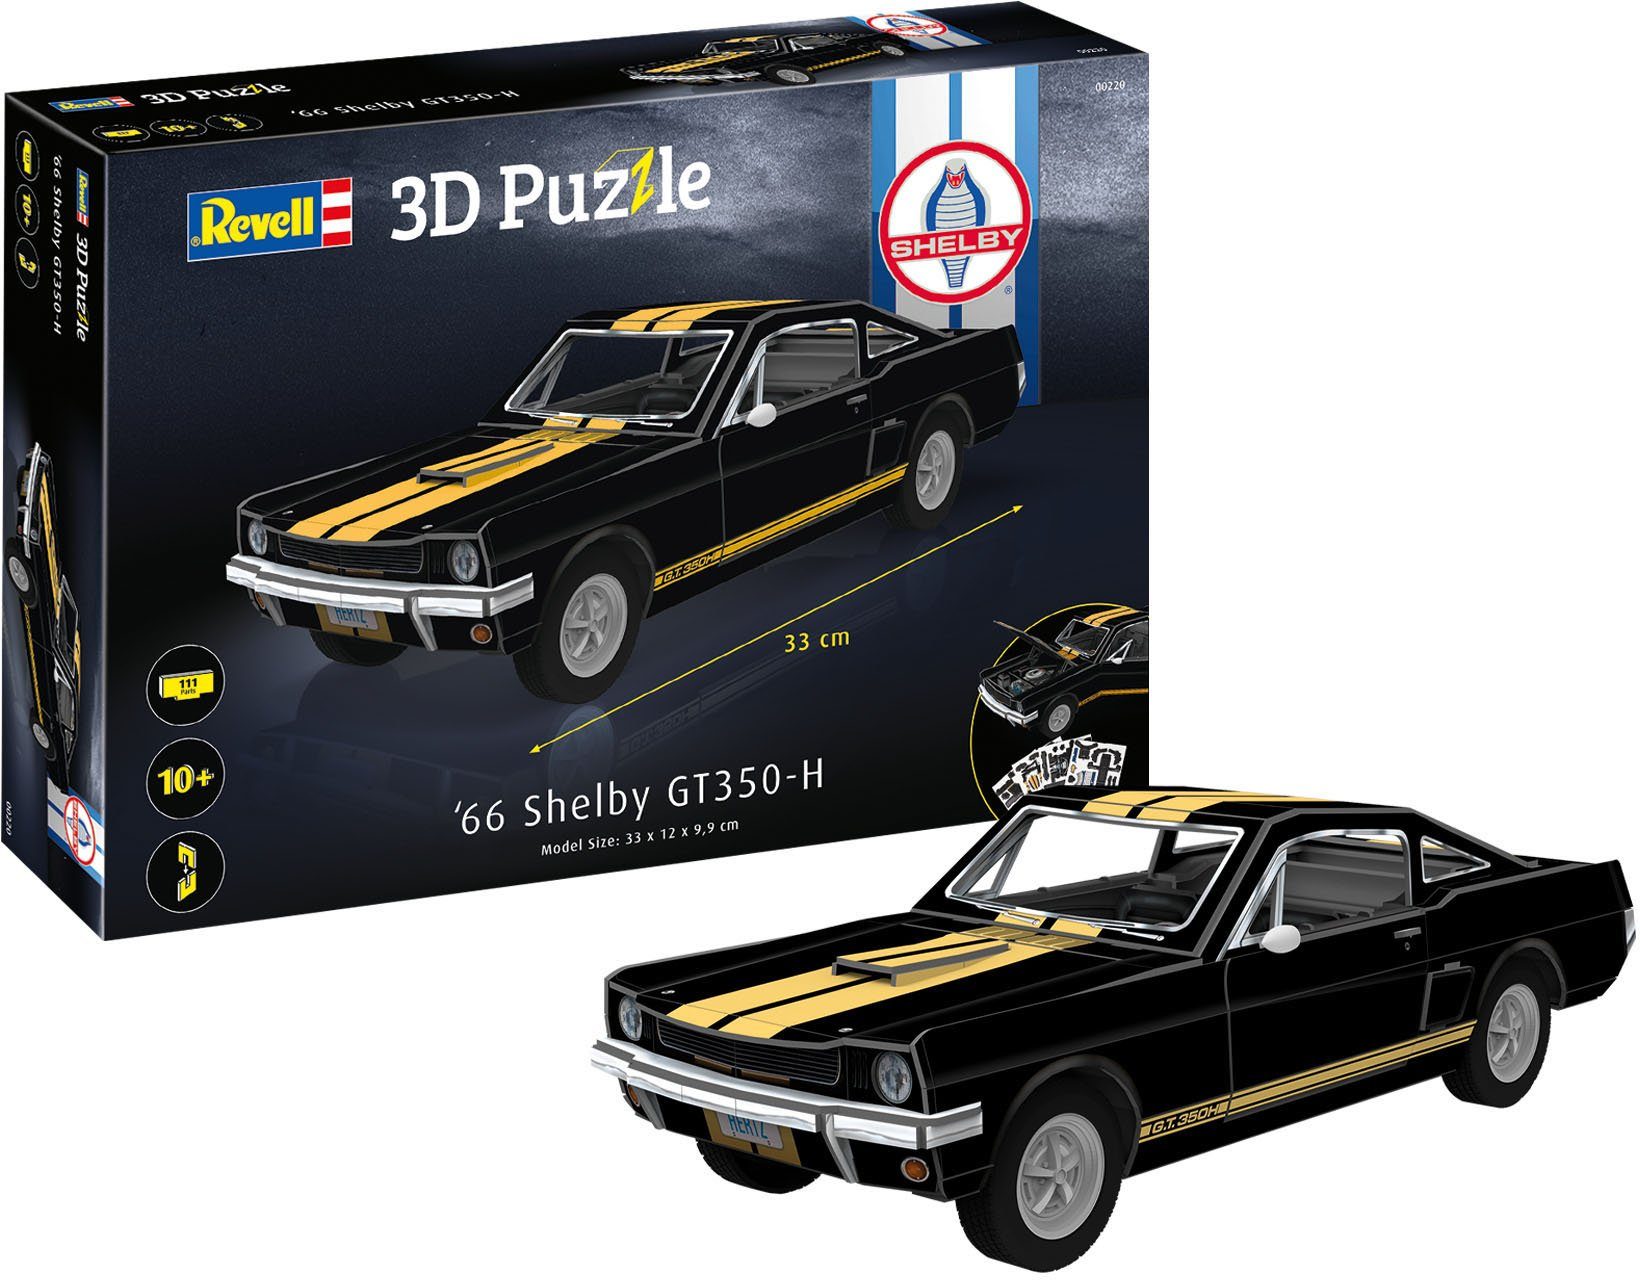 GT350-H, 3D-Puzzle 66 Shelby Puzzleteile 111 Revell®